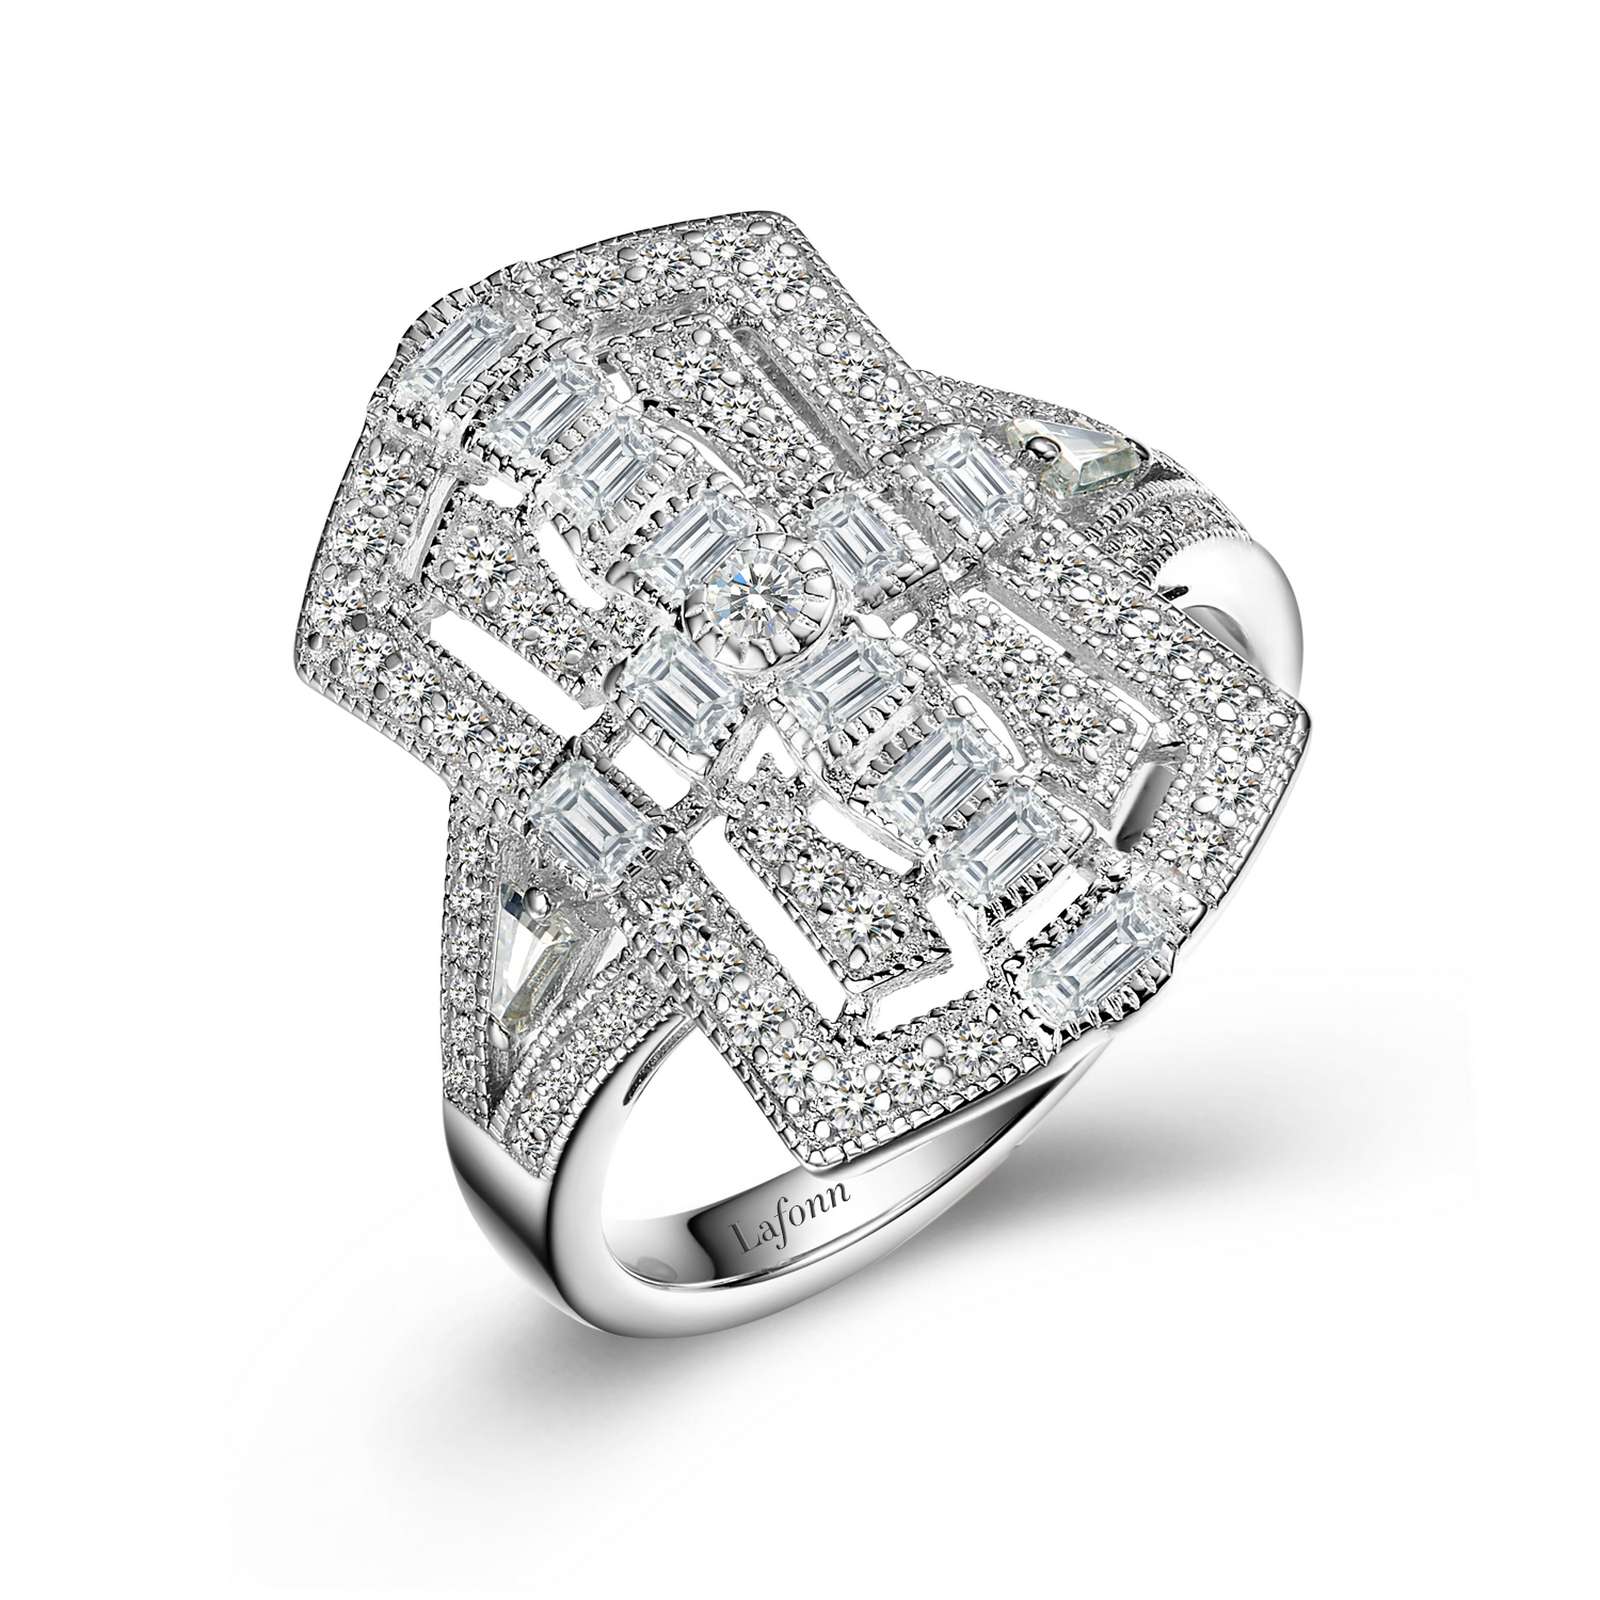 Heritage Simulated Diamond Platinum Bonded Ring Griner Jewelry Co. Moultrie, GA